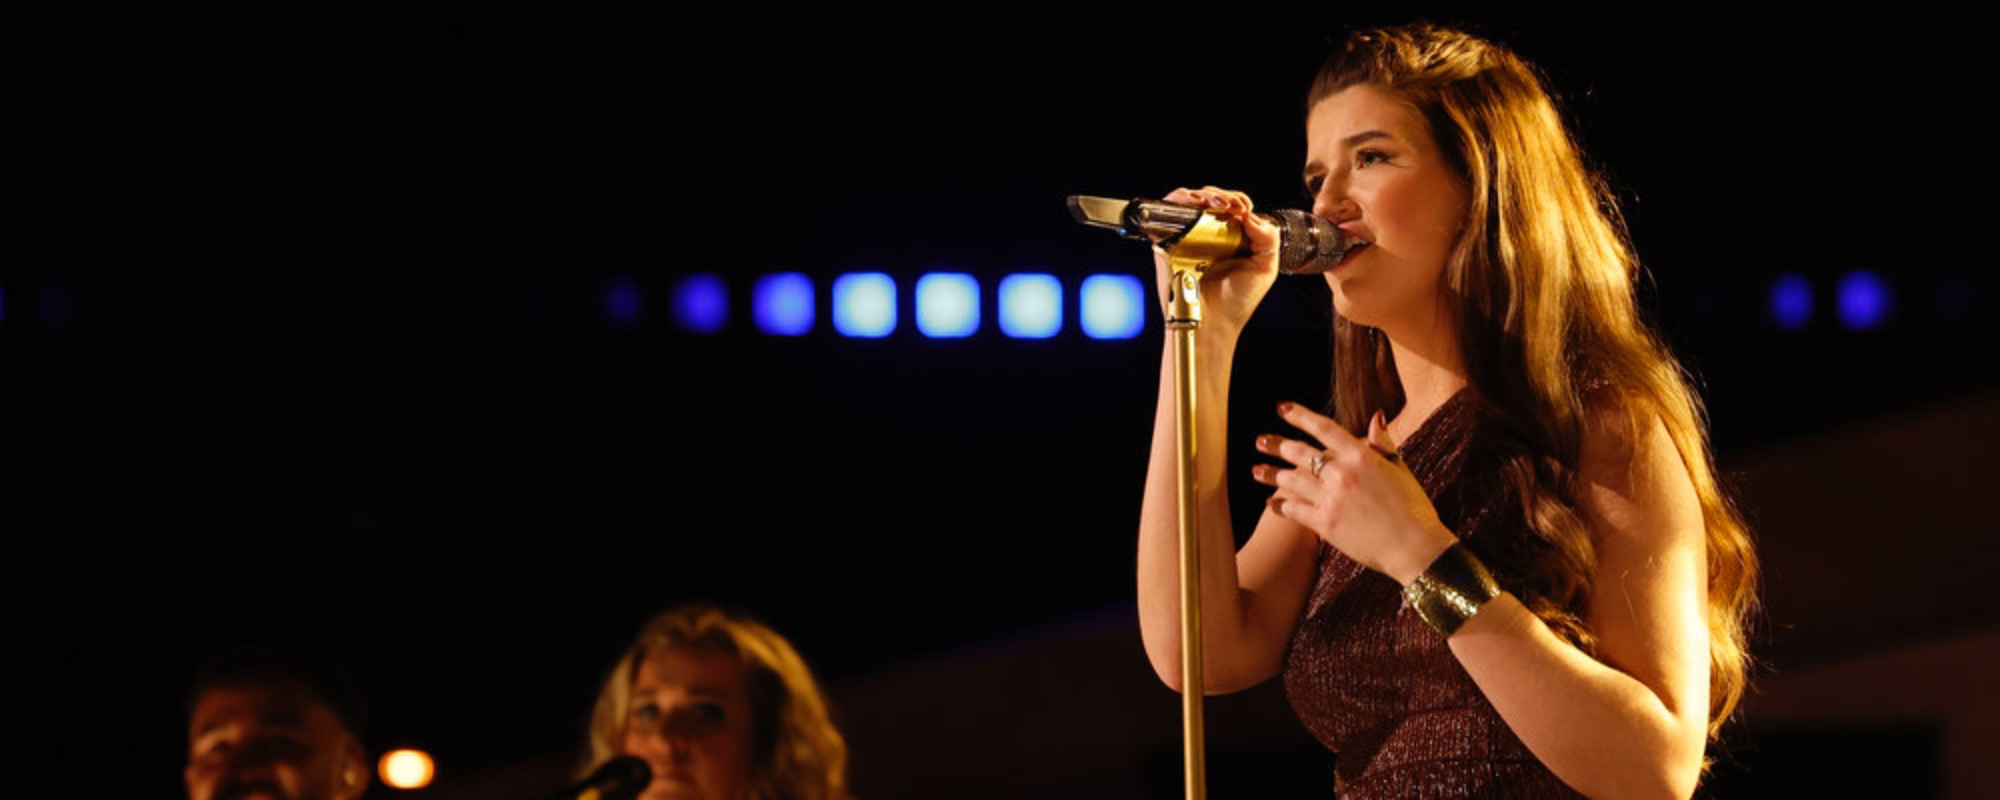 Grace West’s Country Performances Make Team Blake Proud on ‘The Voice’